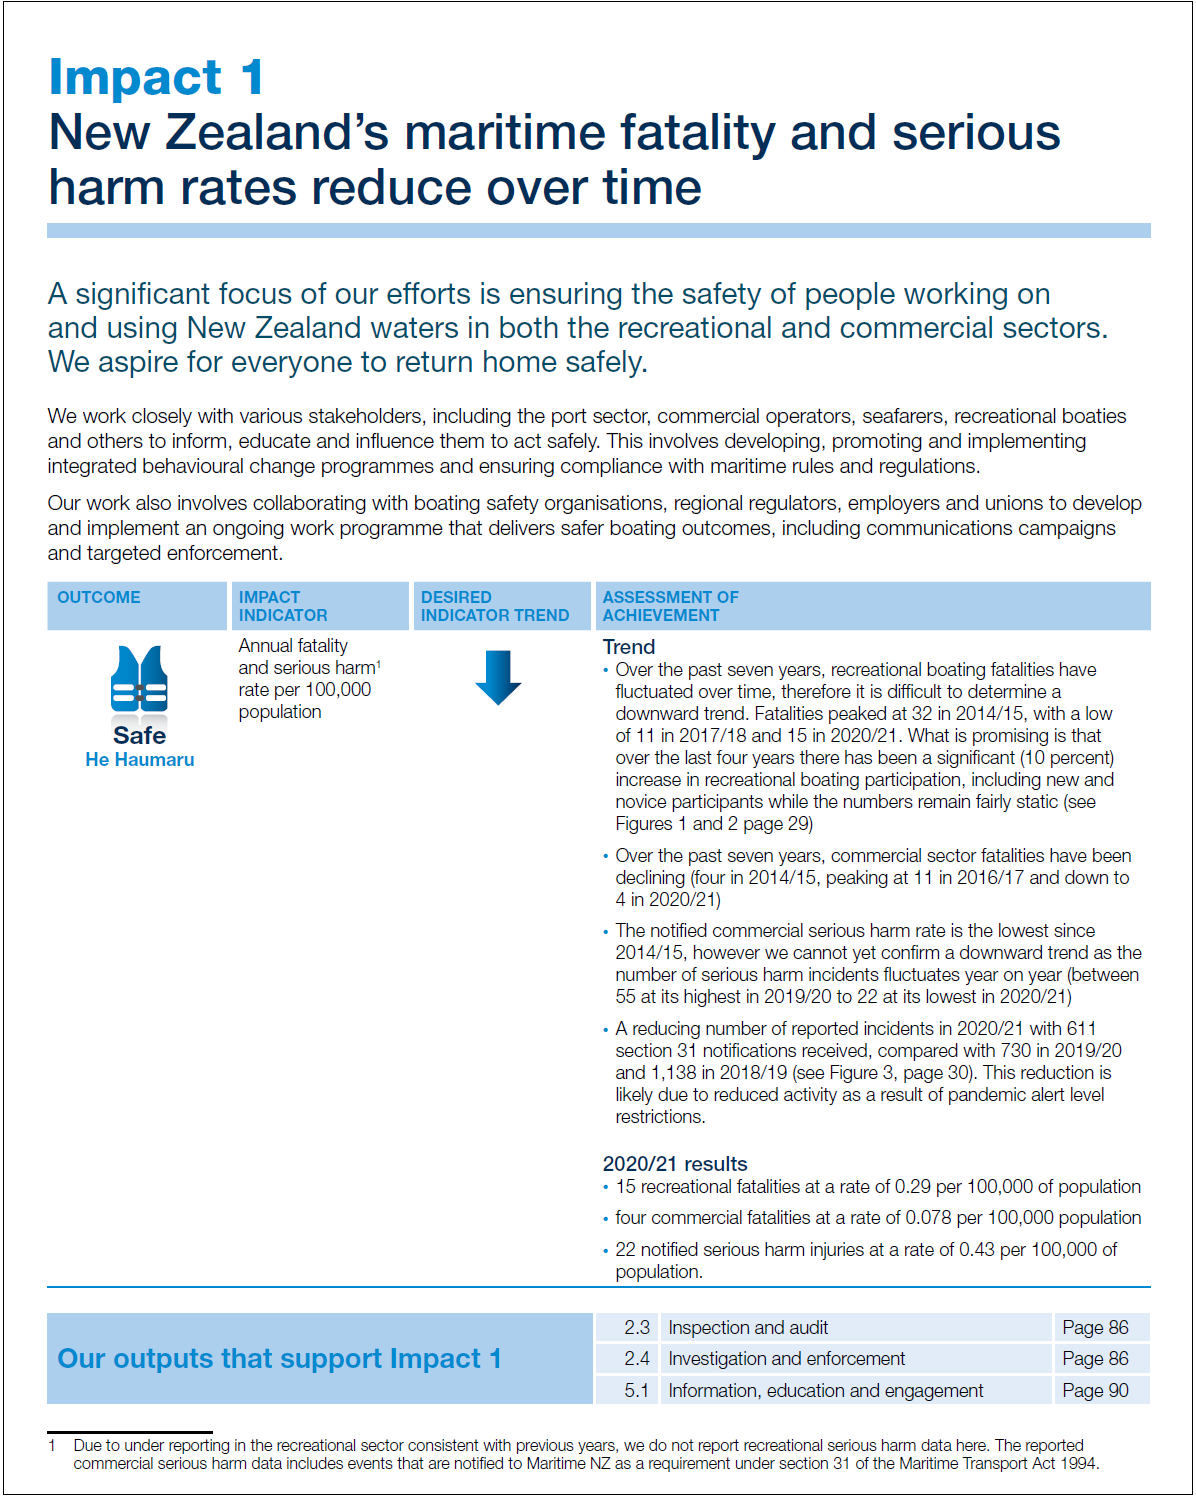 Image from the Maritime New Zealand’s 2020/21 Annual Report showing one of its impacts: New Zealand’s maritime fatality and serious harm rates reduce over time, and how it links to the impact indicator and outcome.